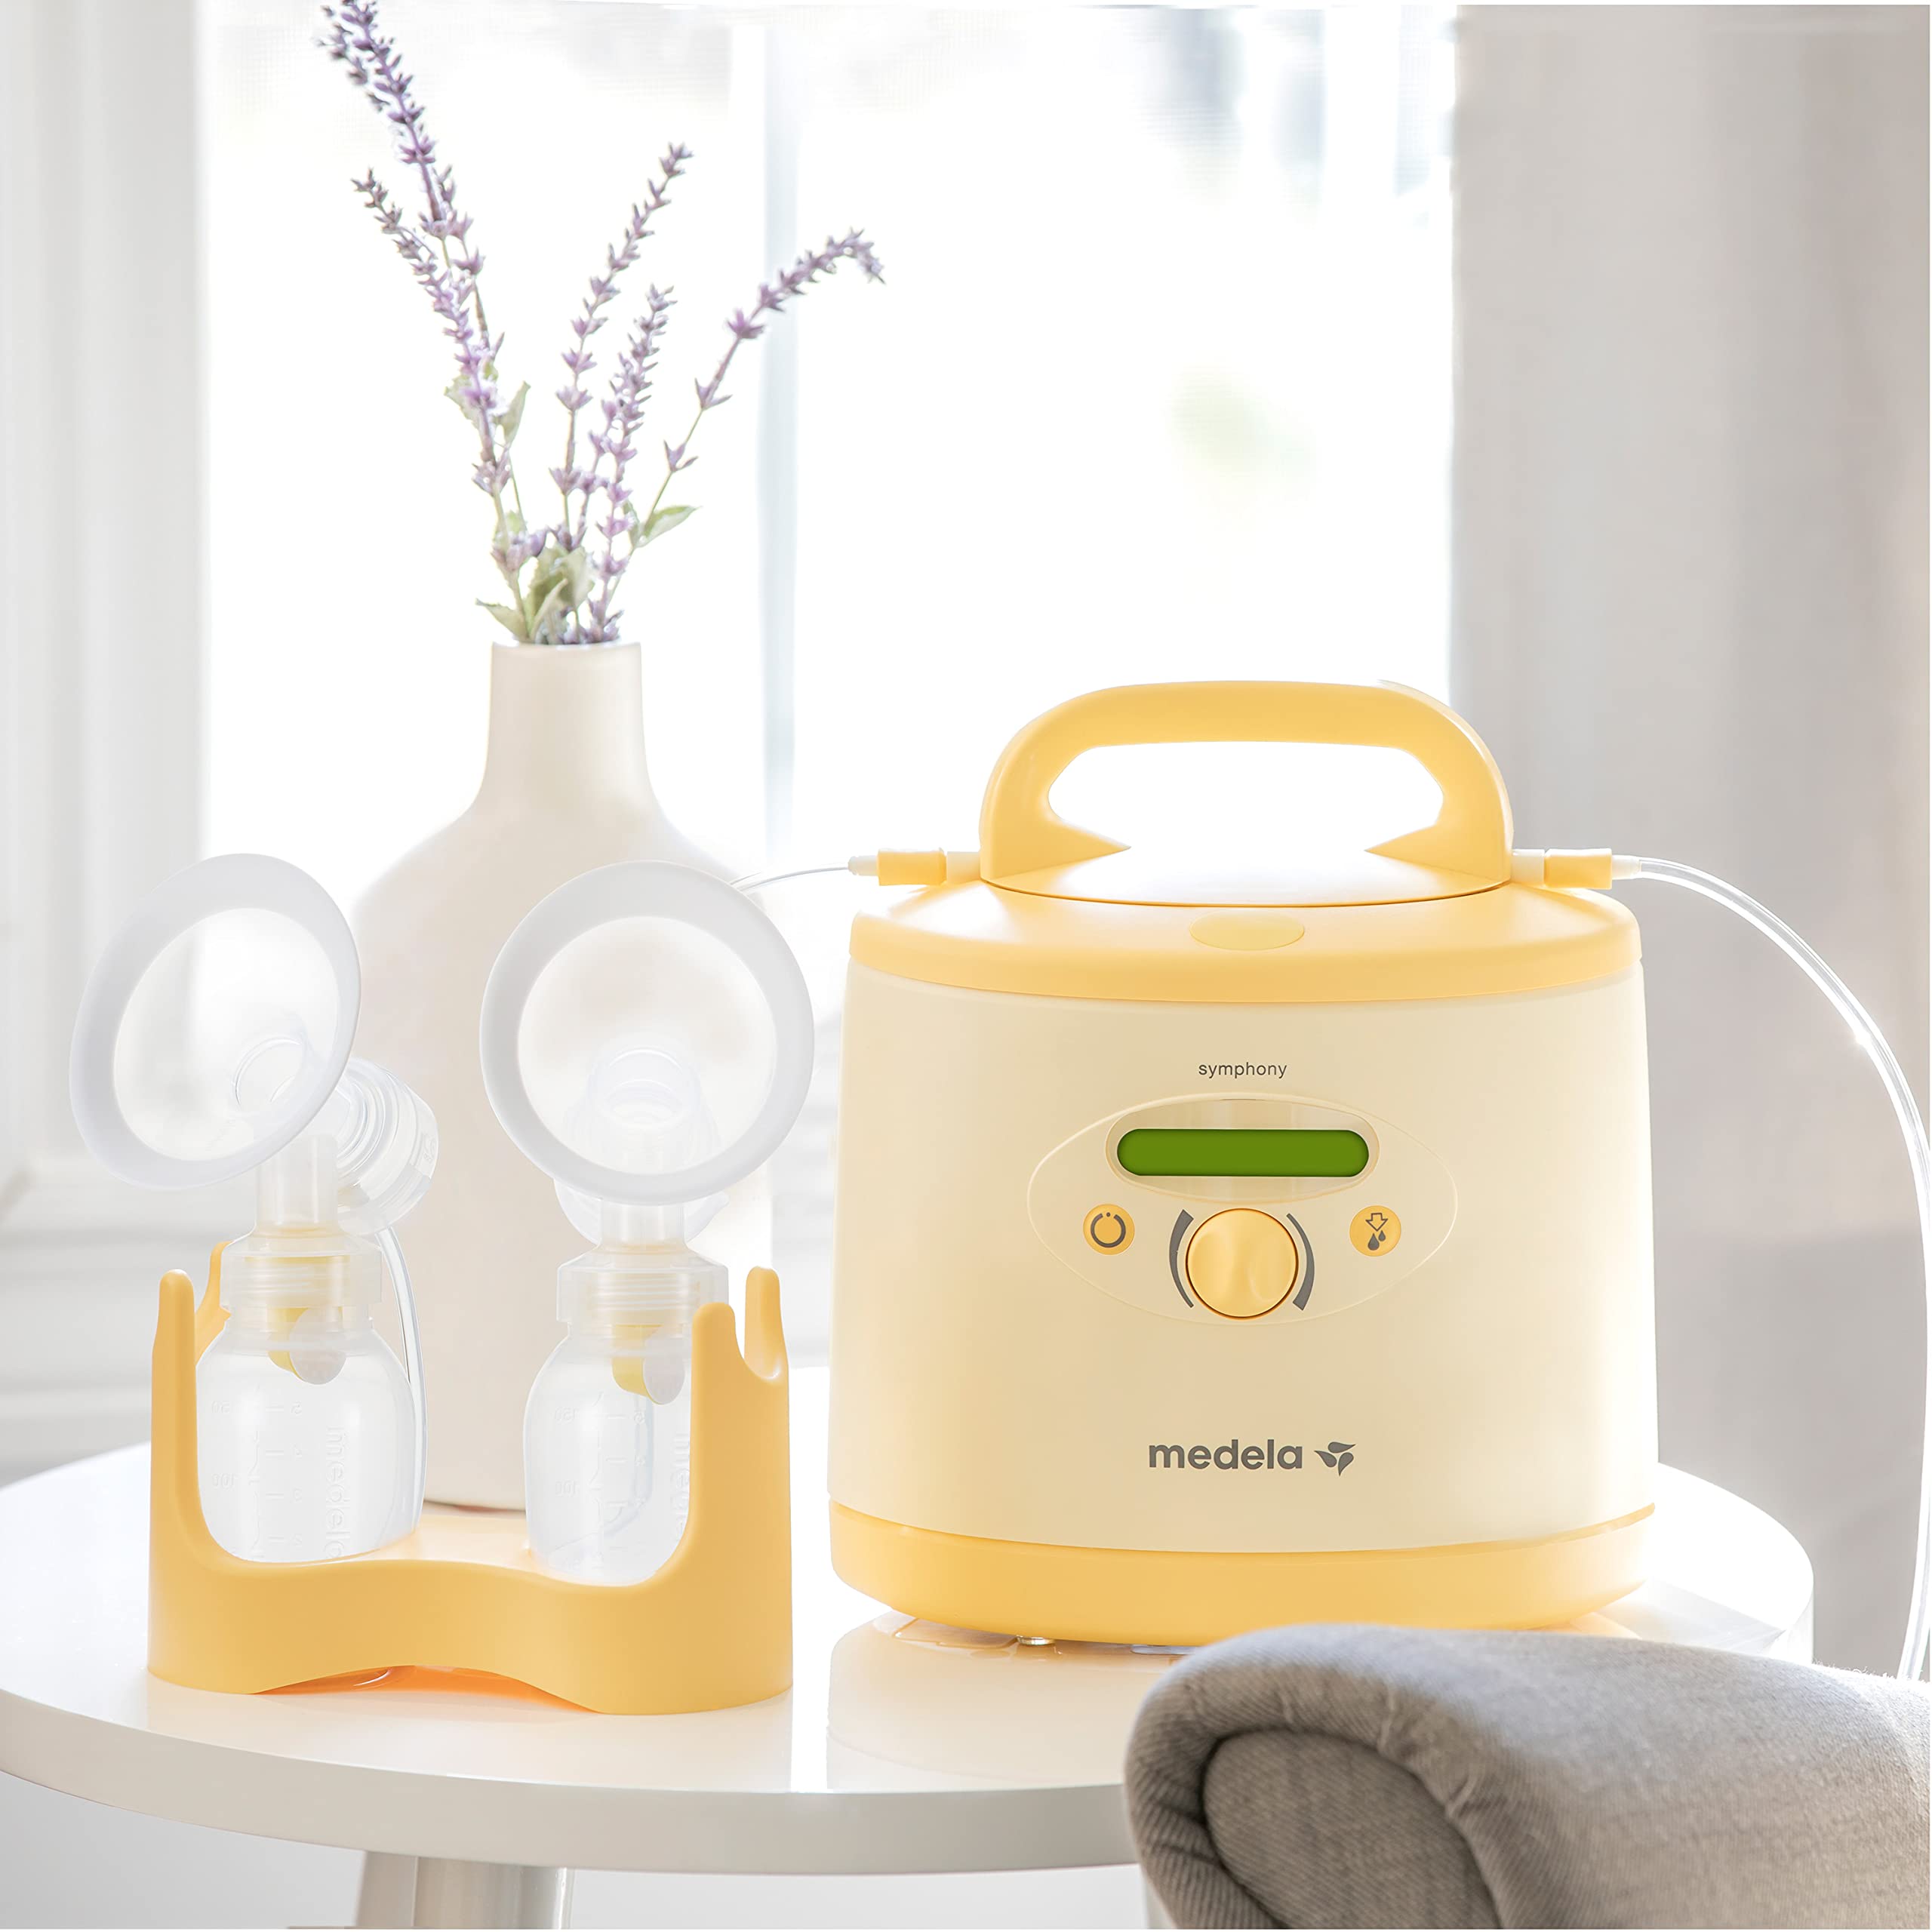 Medela Symphony Breast Pump Hospital Grade Single or Double Electric Pumping Efficient and Comfortable